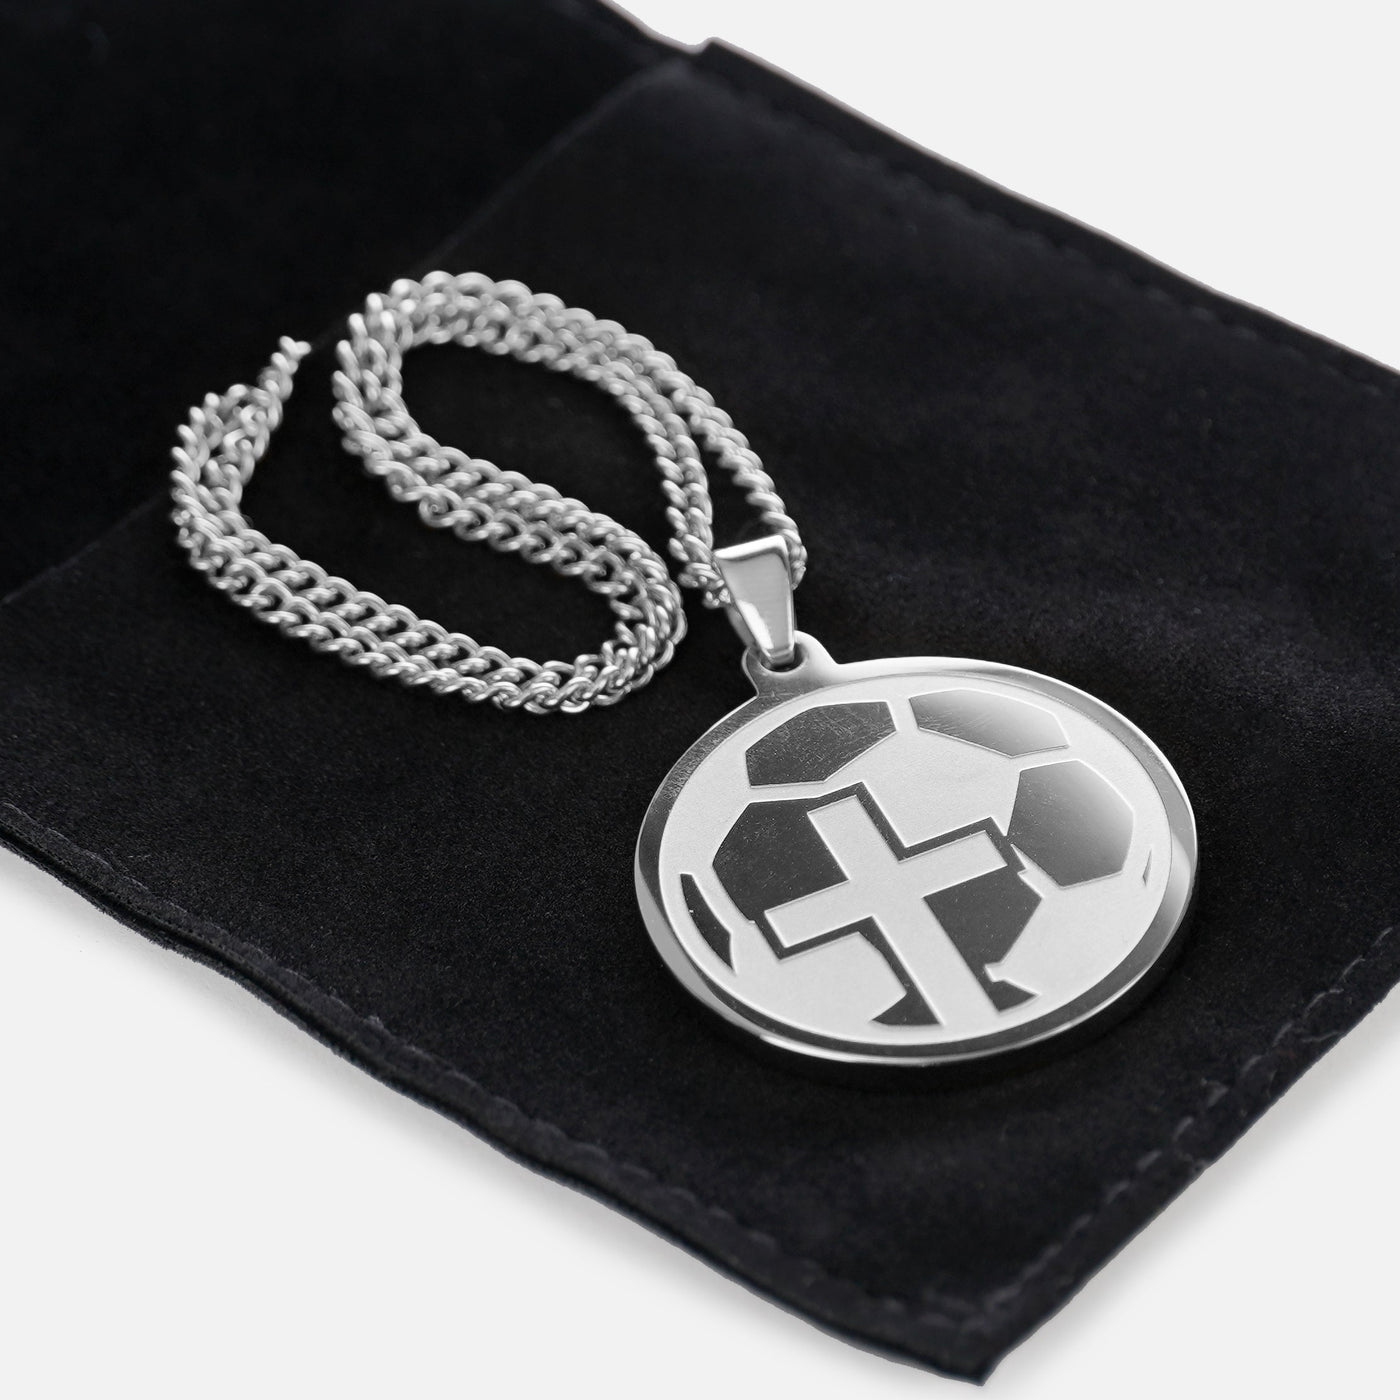 Soccer Faith Cross Pendant with Chain Kids Necklace - Stainless Steel